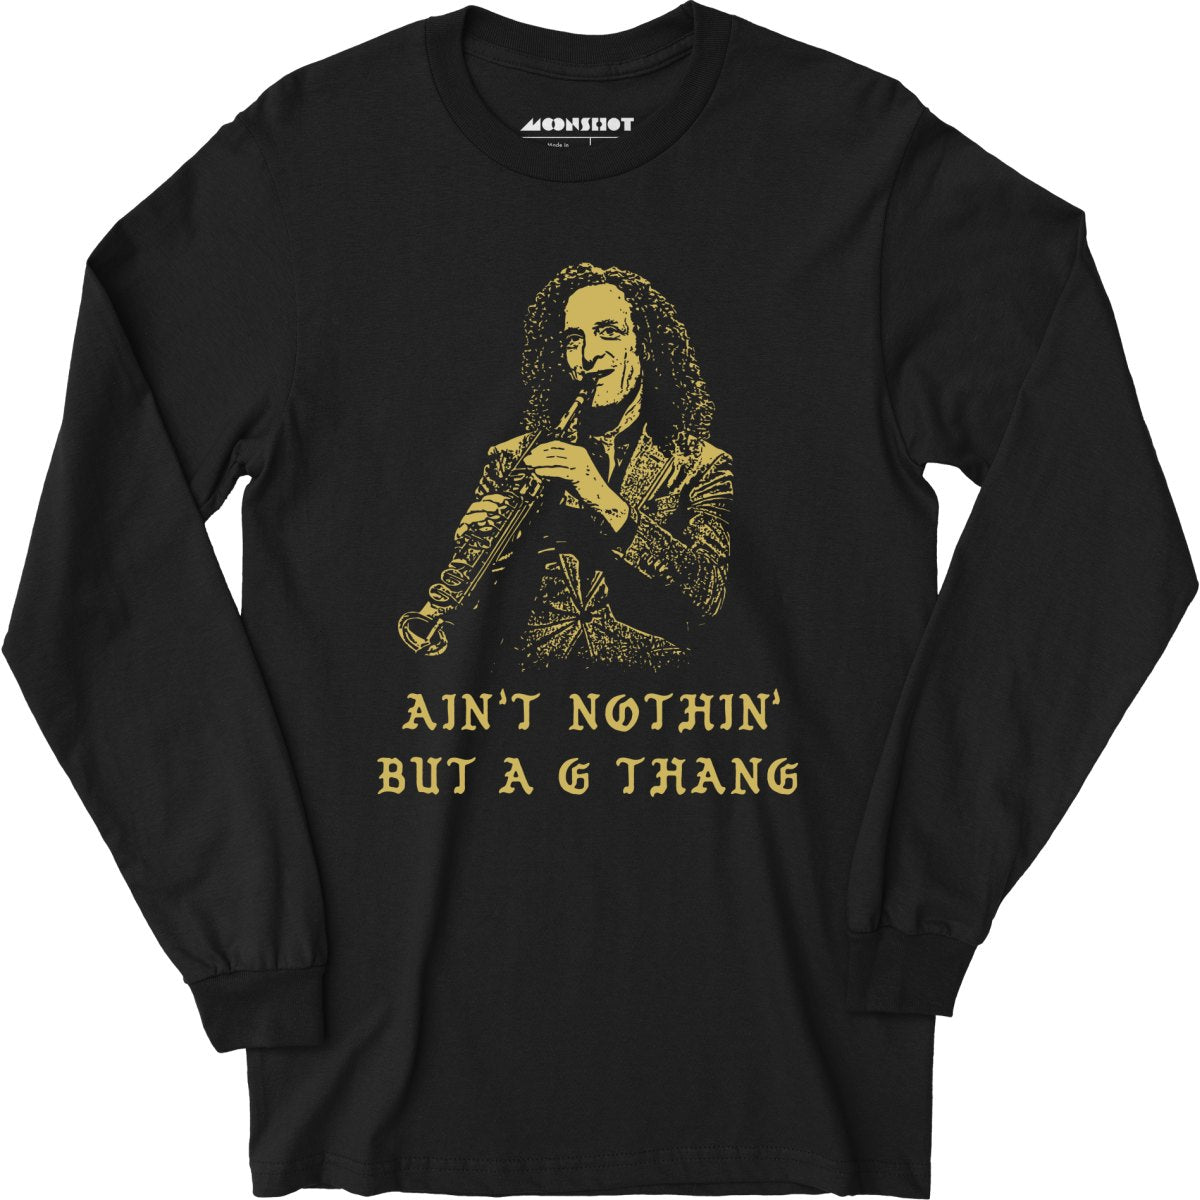 Ain't Nothin' But a G Thang - Long Sleeve T-Shirt